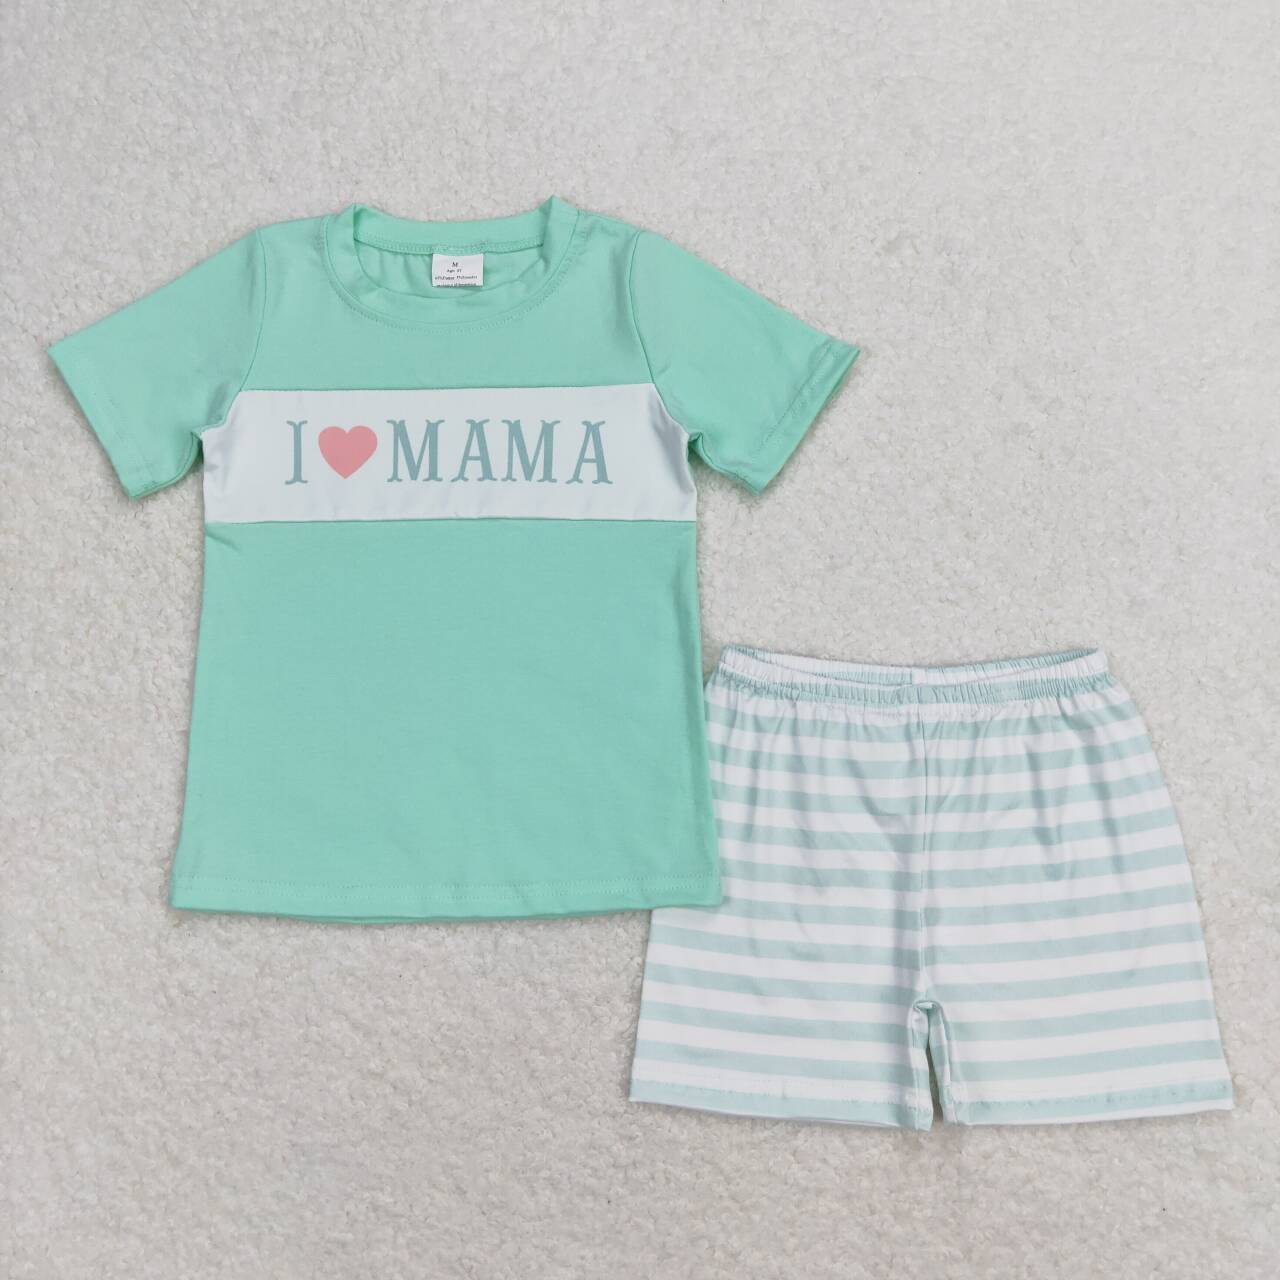 i love mama boy shorts set mother's day clothes